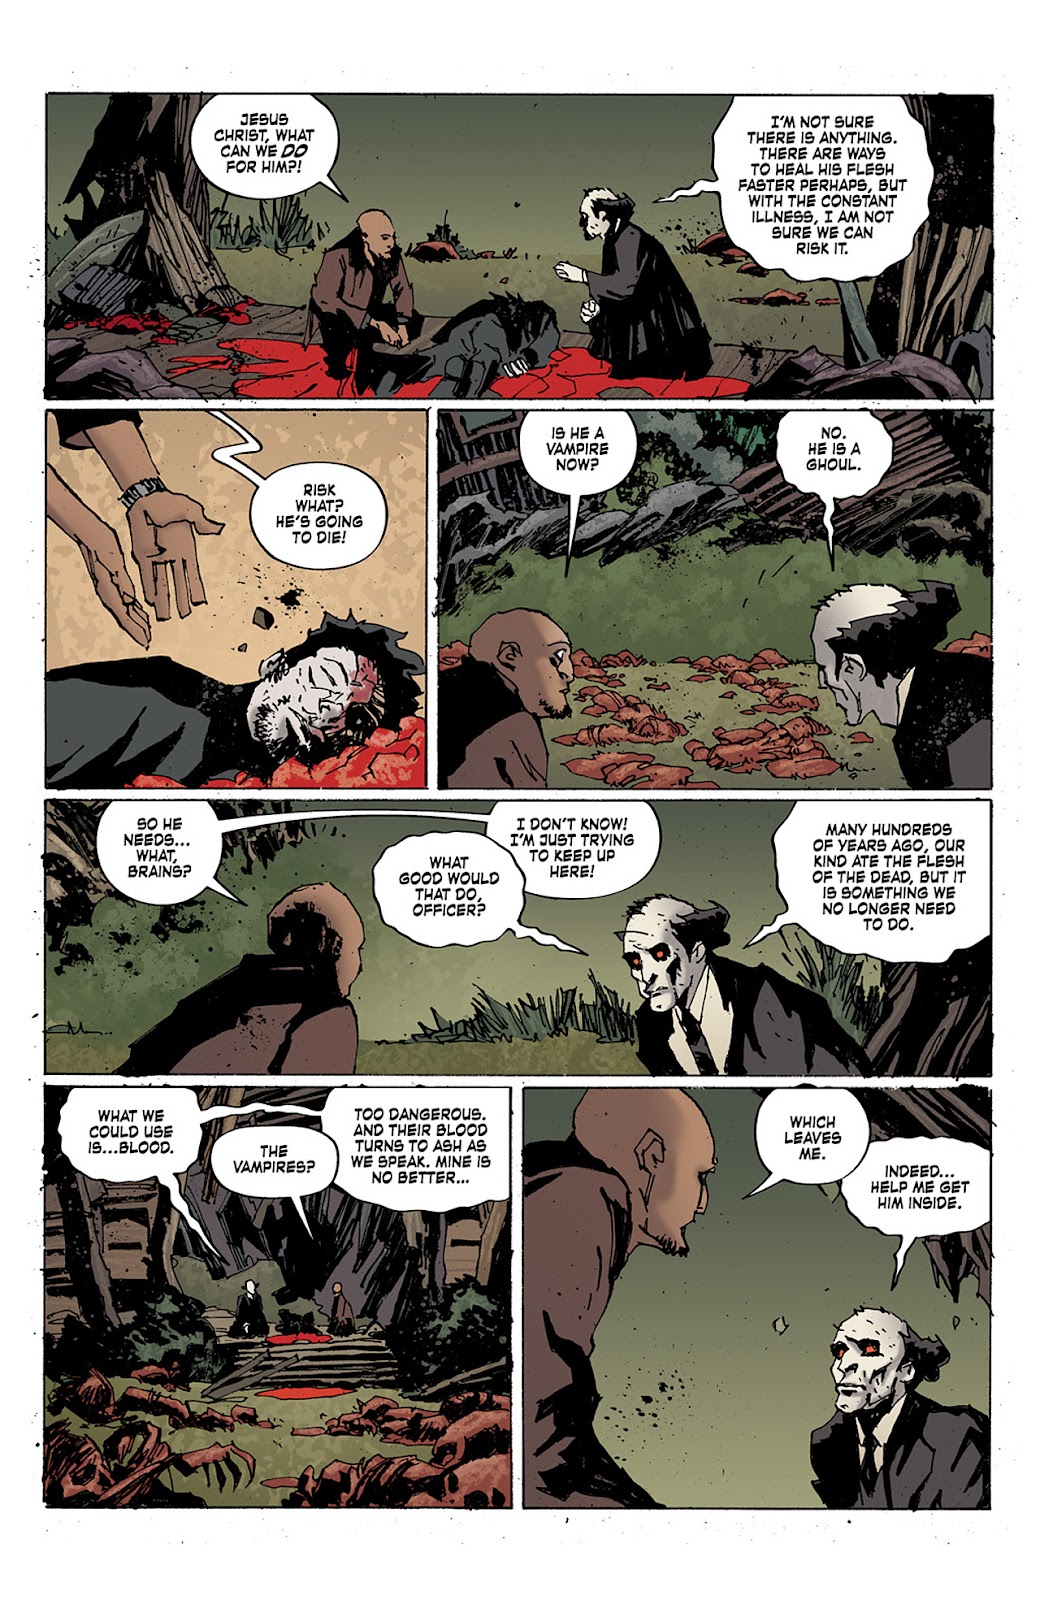 Criminal Macabre: Final Night - The 30 Days of Night Crossover issue 4 - Page 5